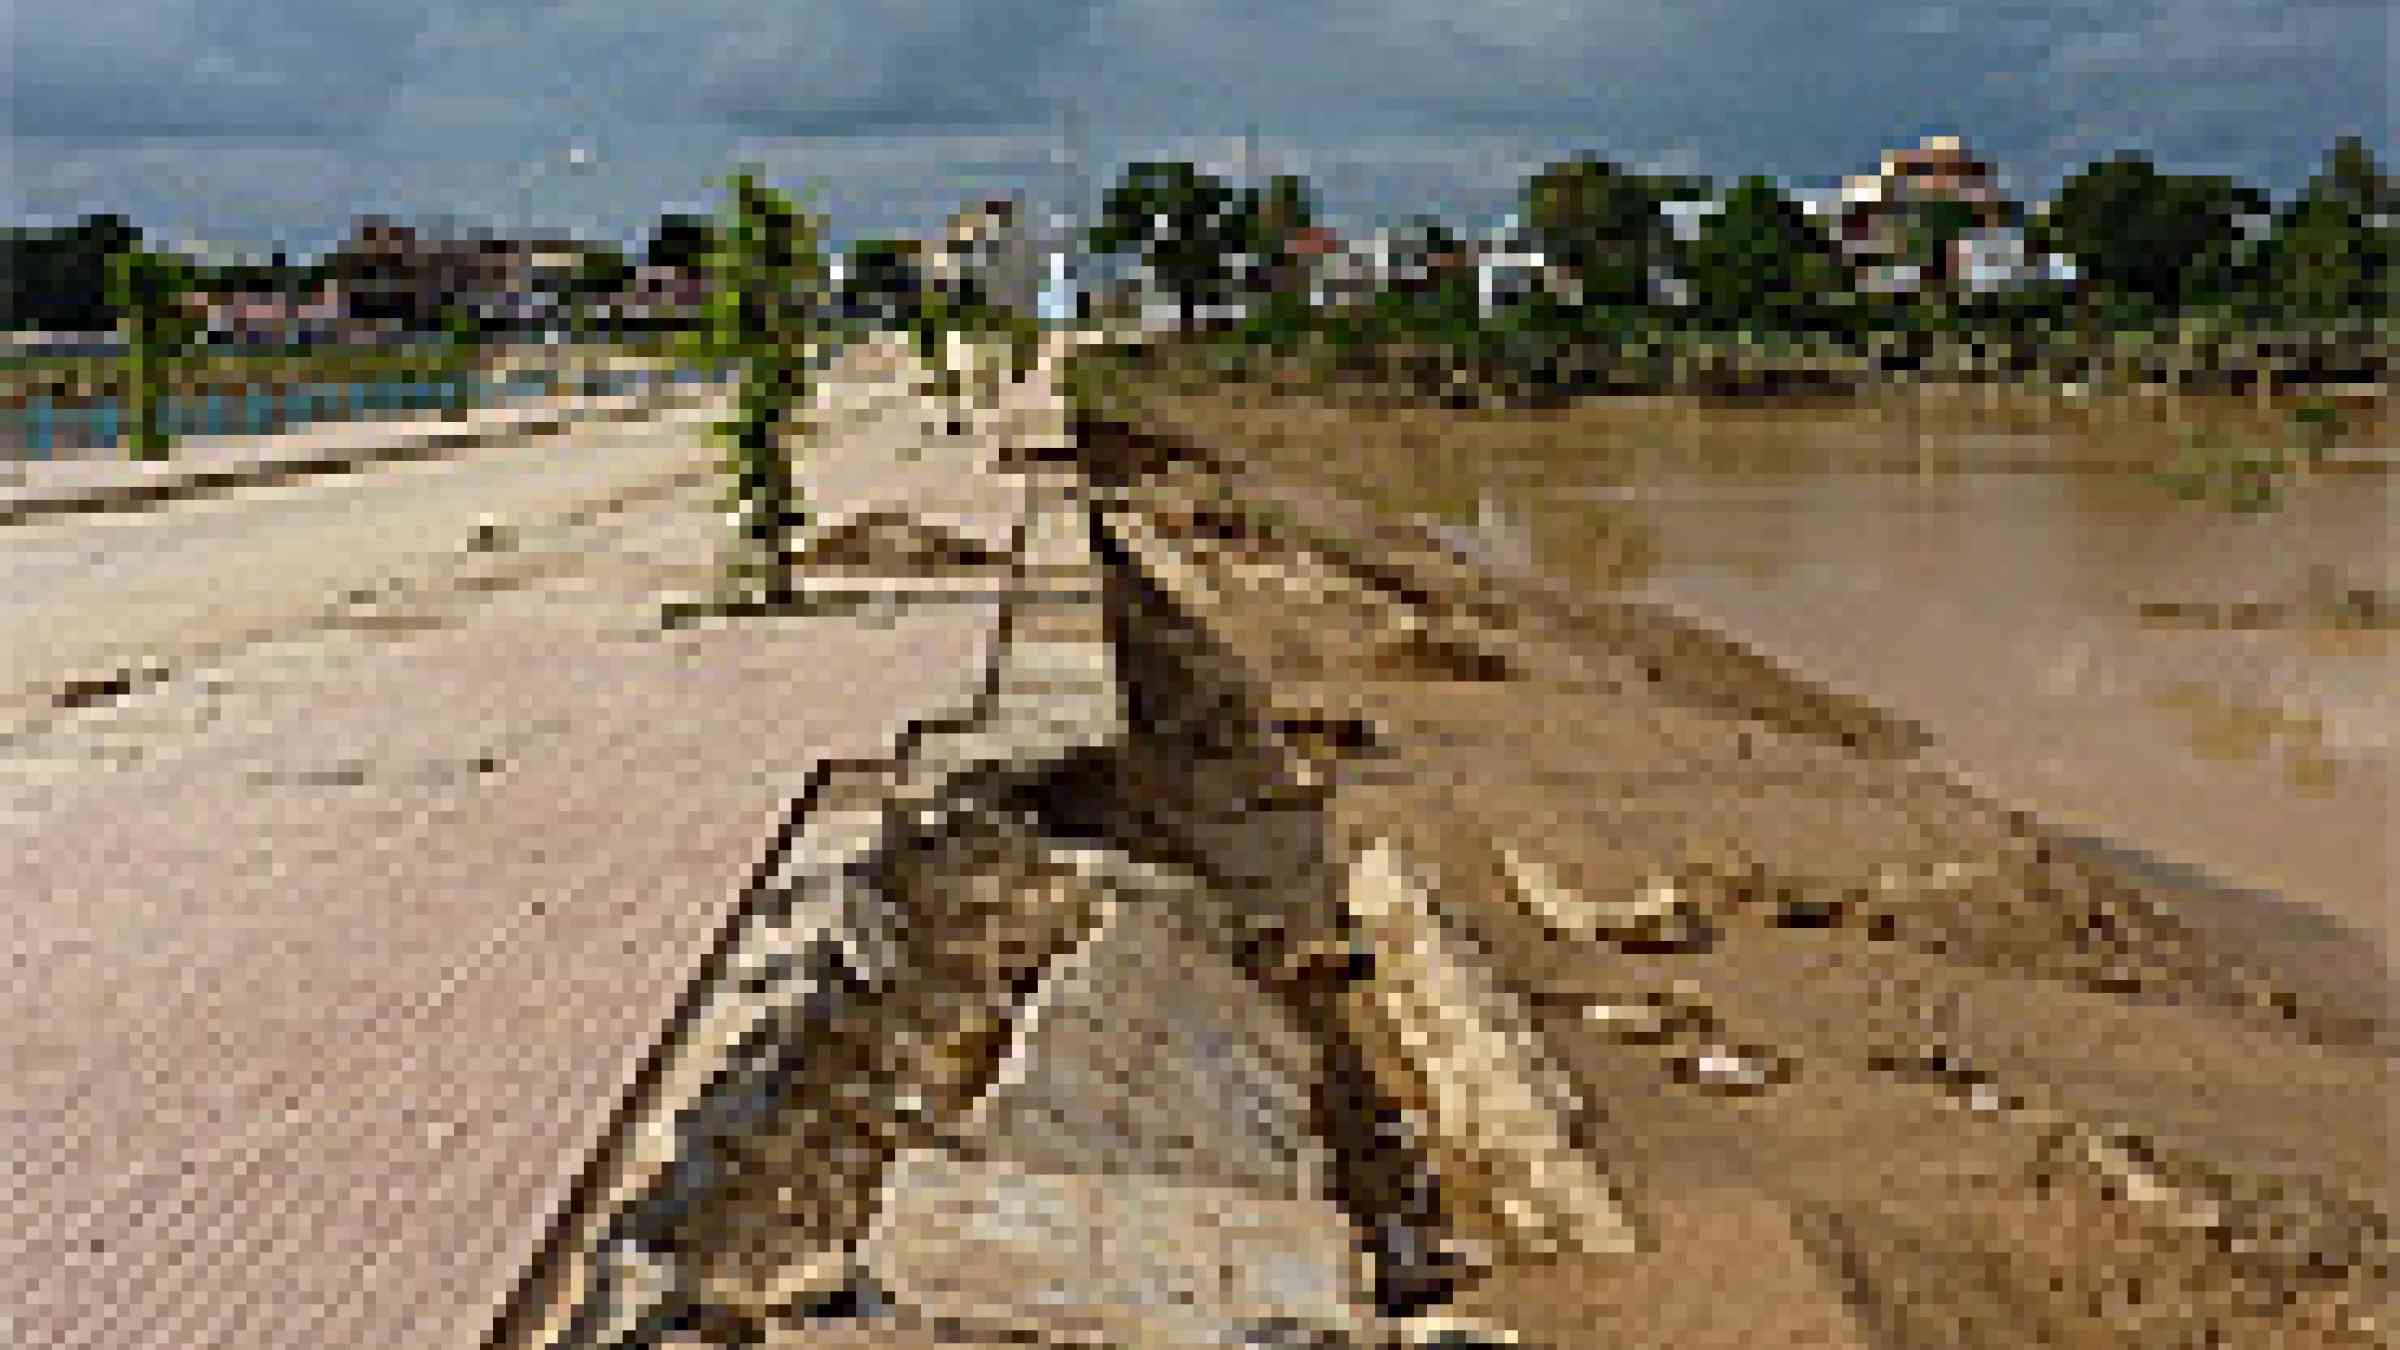 Photo of damage in Kon Tum from Ketsana storm, Viet Nam, by Flickr user, Jectre, Creative Commons Attribution-Noncommercial 2.0 Generic, http://www.flickr.com/photos/jectre/3973601269/